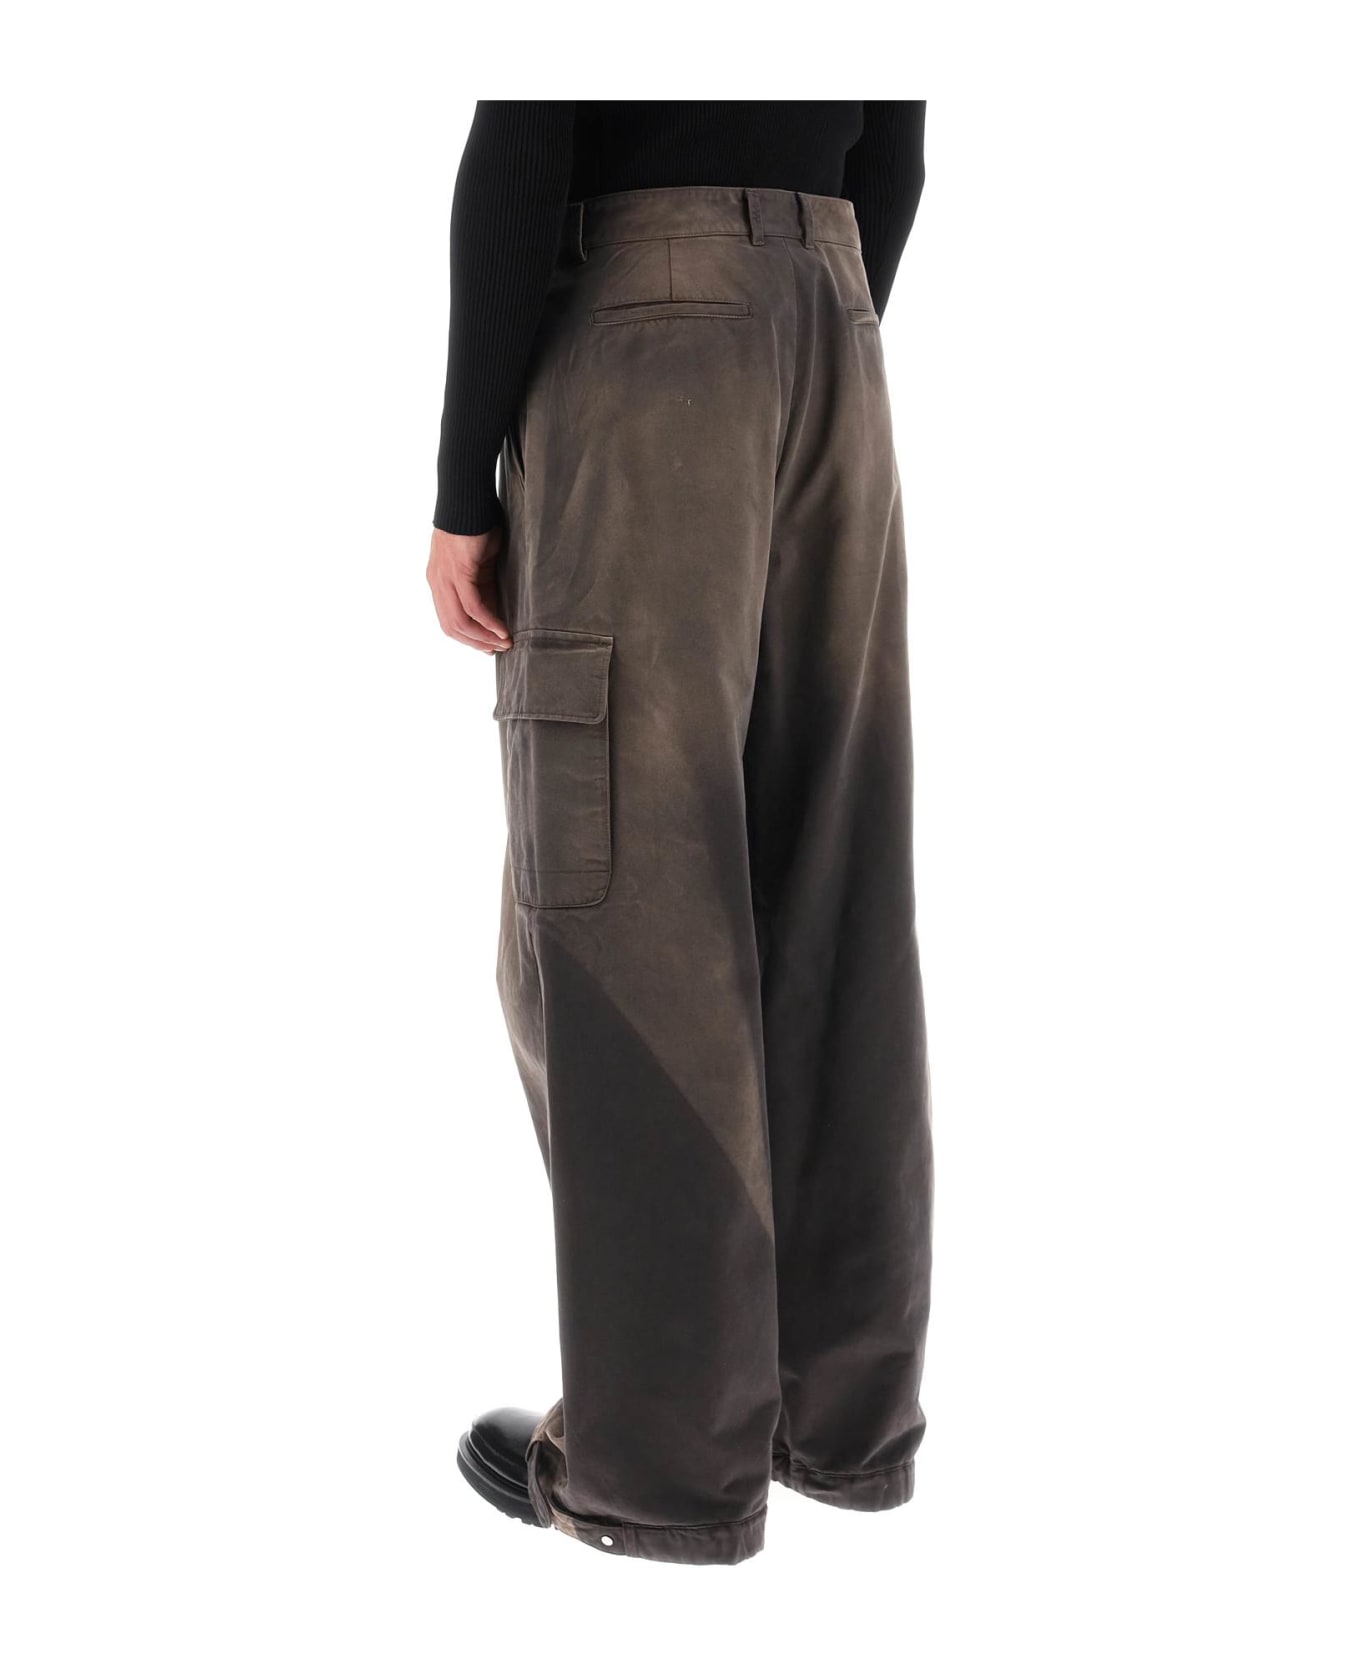 Off-White Cargo Pants - ANTHRACITE (Brown) ボトムス